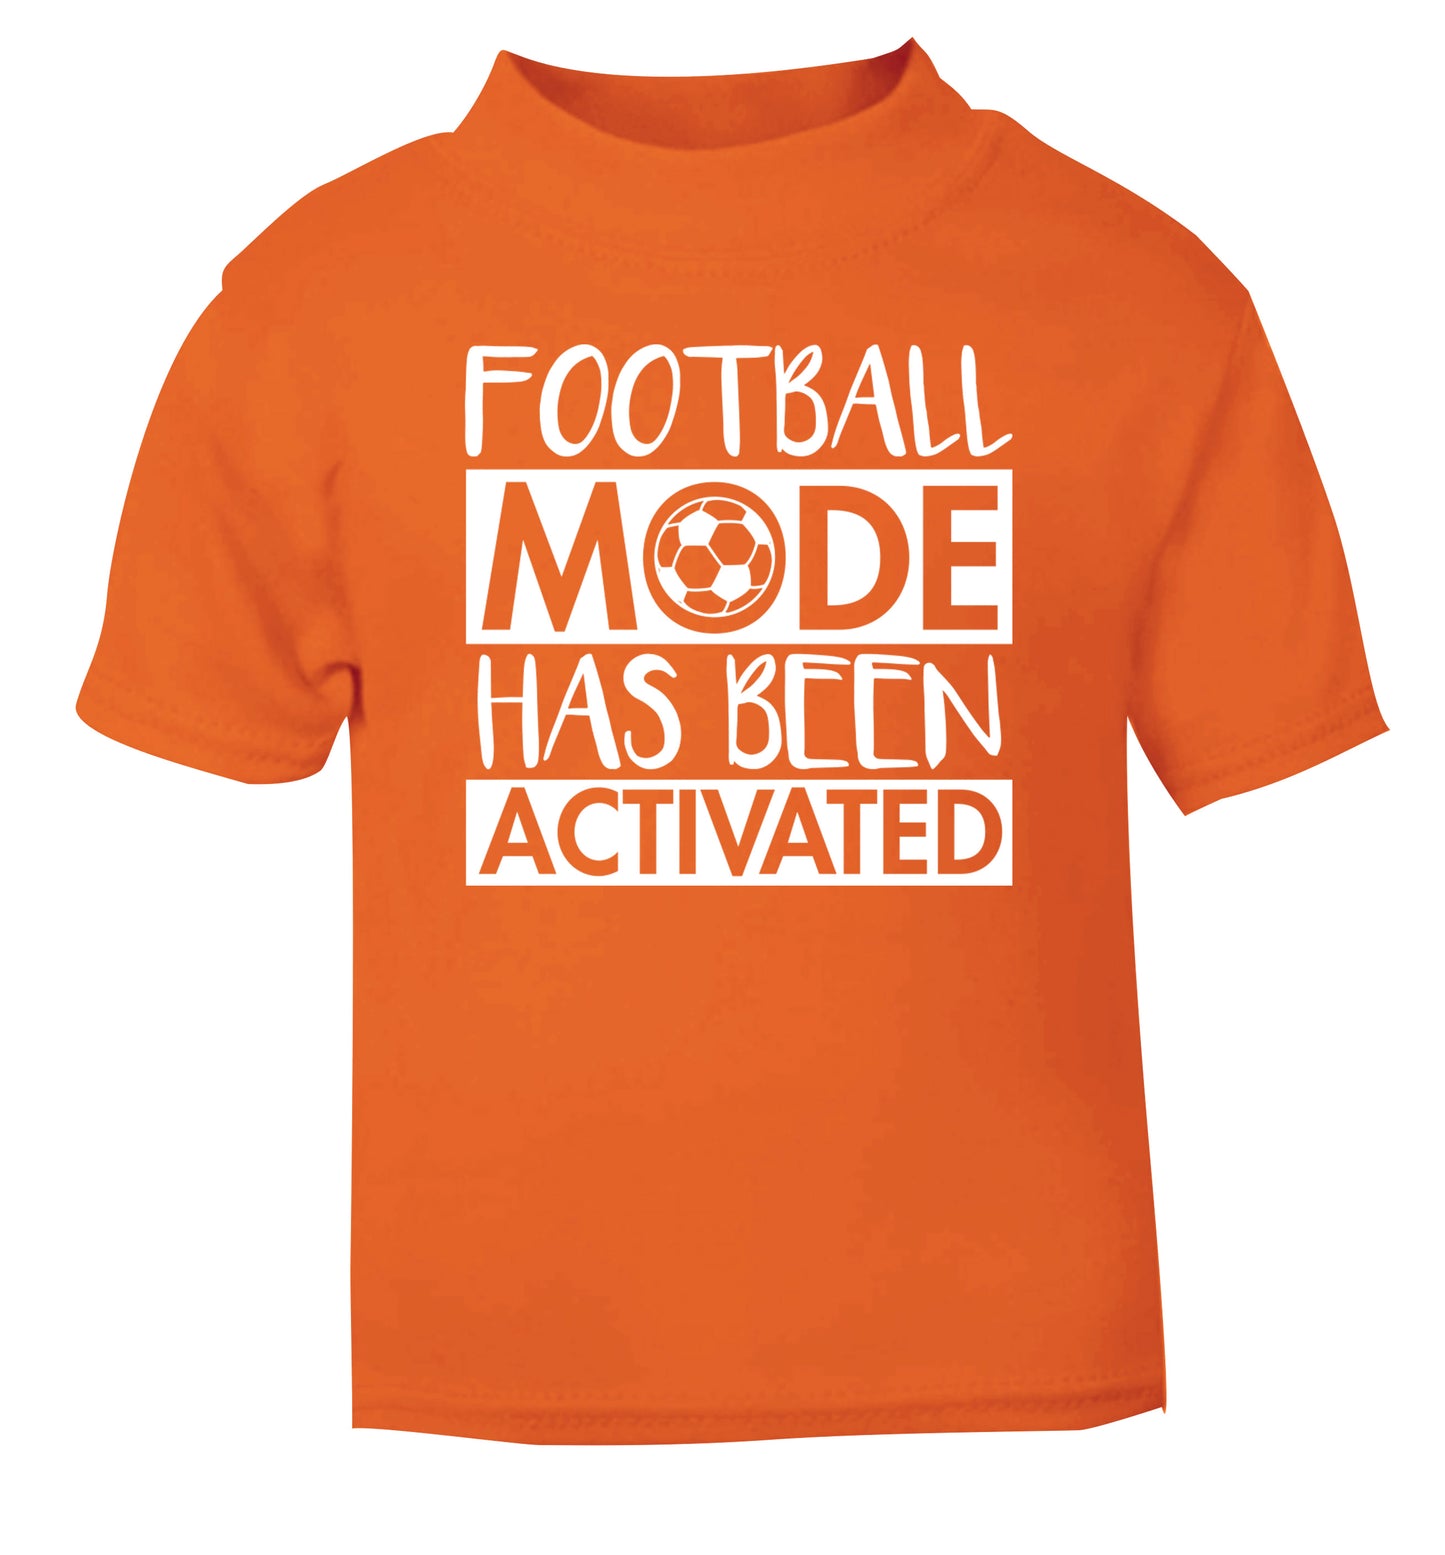 Football mode has been activated orange Baby Toddler Tshirt 2 Years